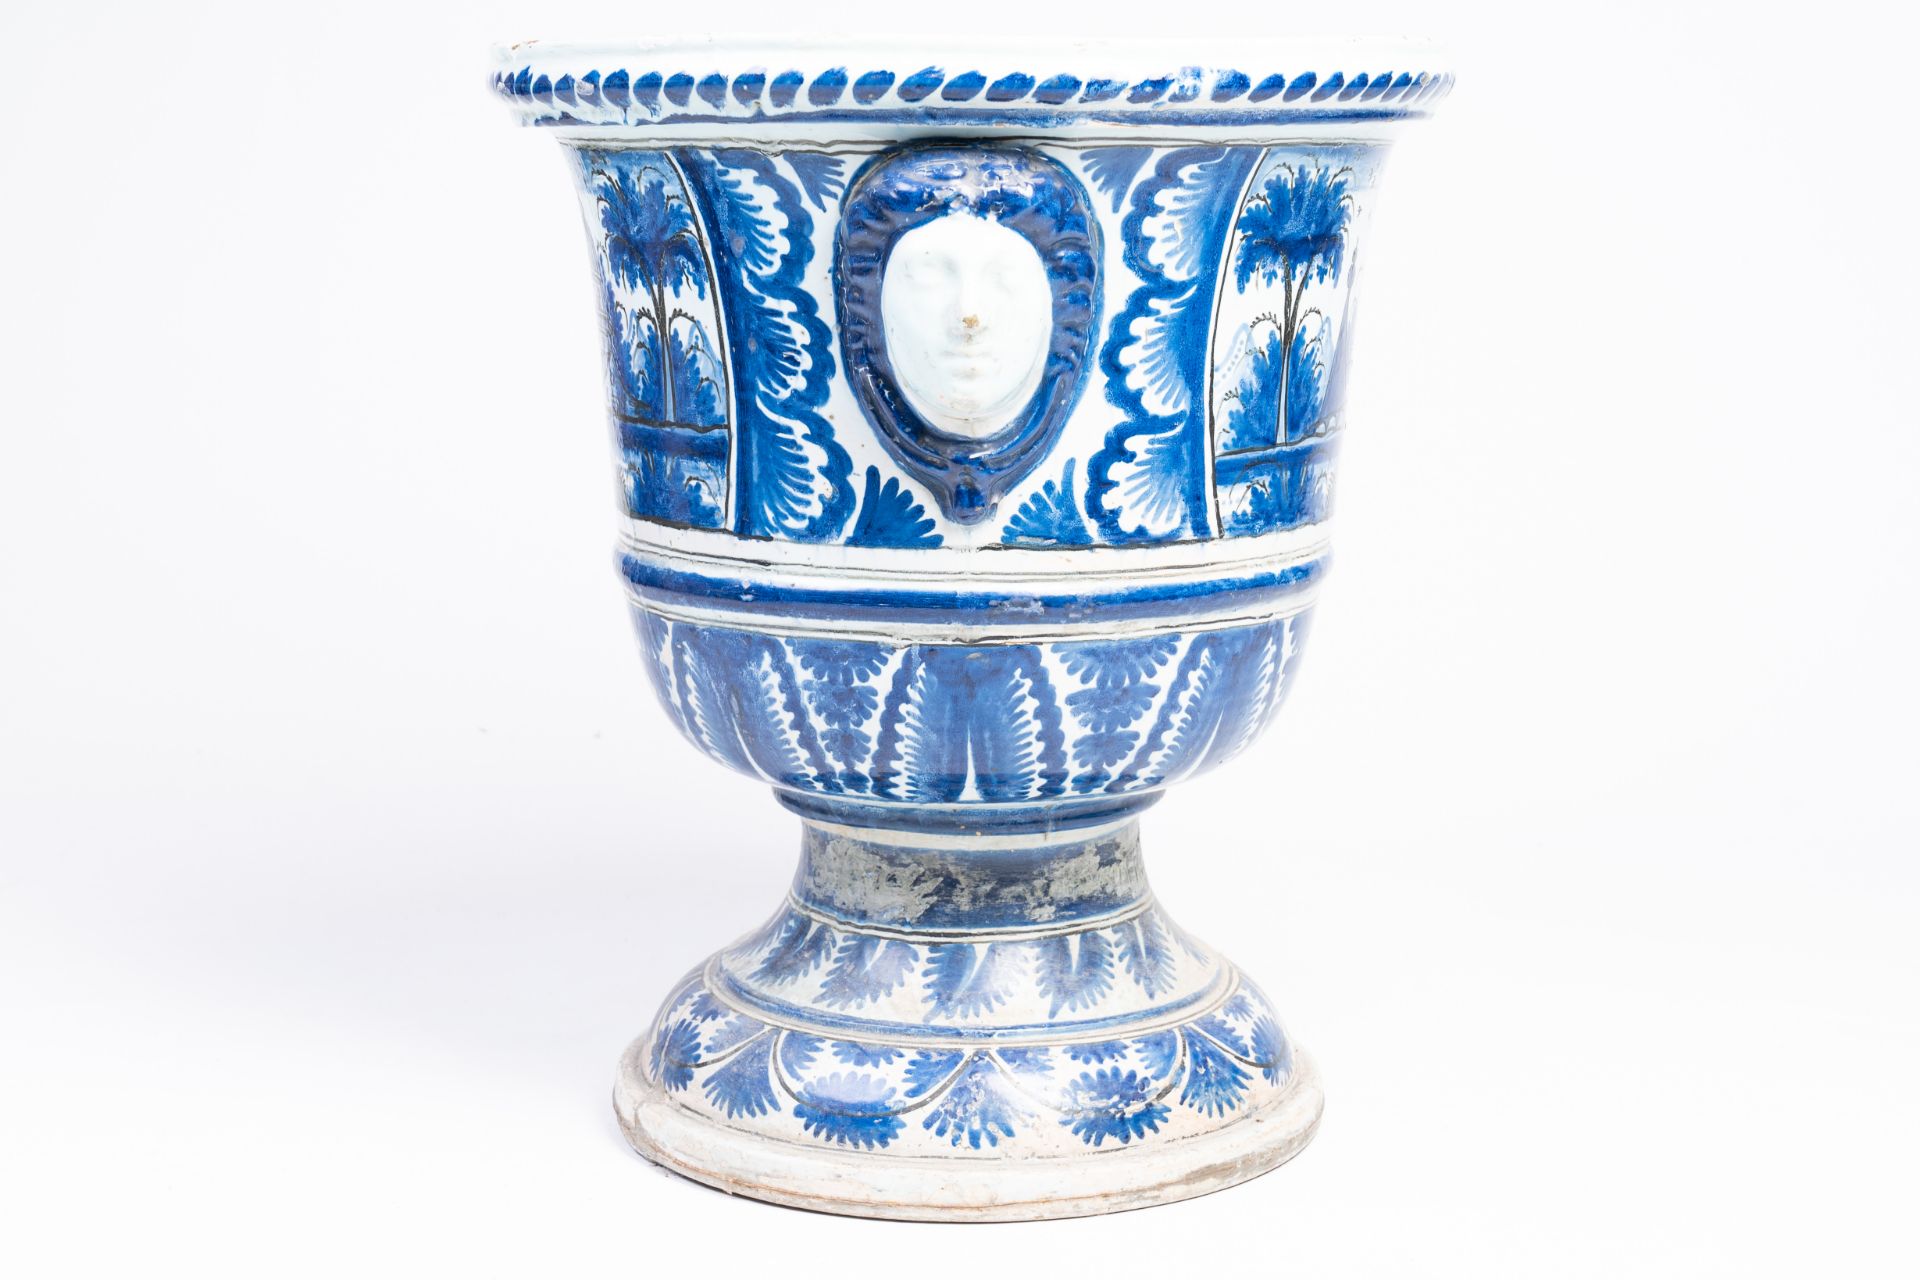 A large French blue and white earthenware Louis XIV vase on stand with oriental landscapes and masca - Image 4 of 6